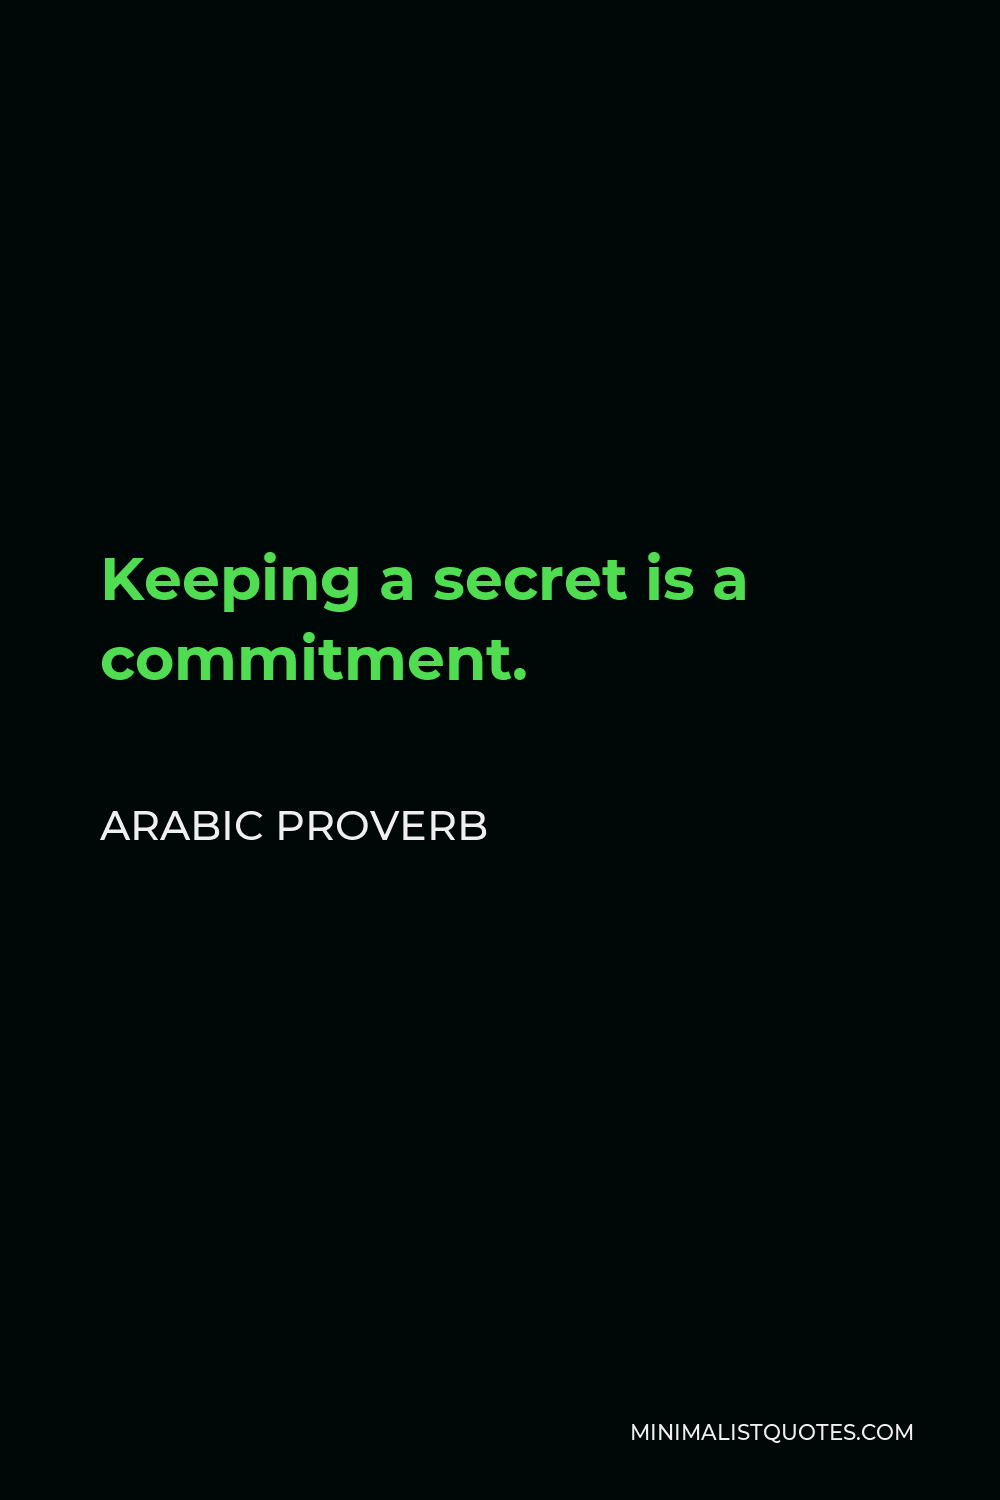 Arabic Proverb Quote - Keeping a secret is a commitment.